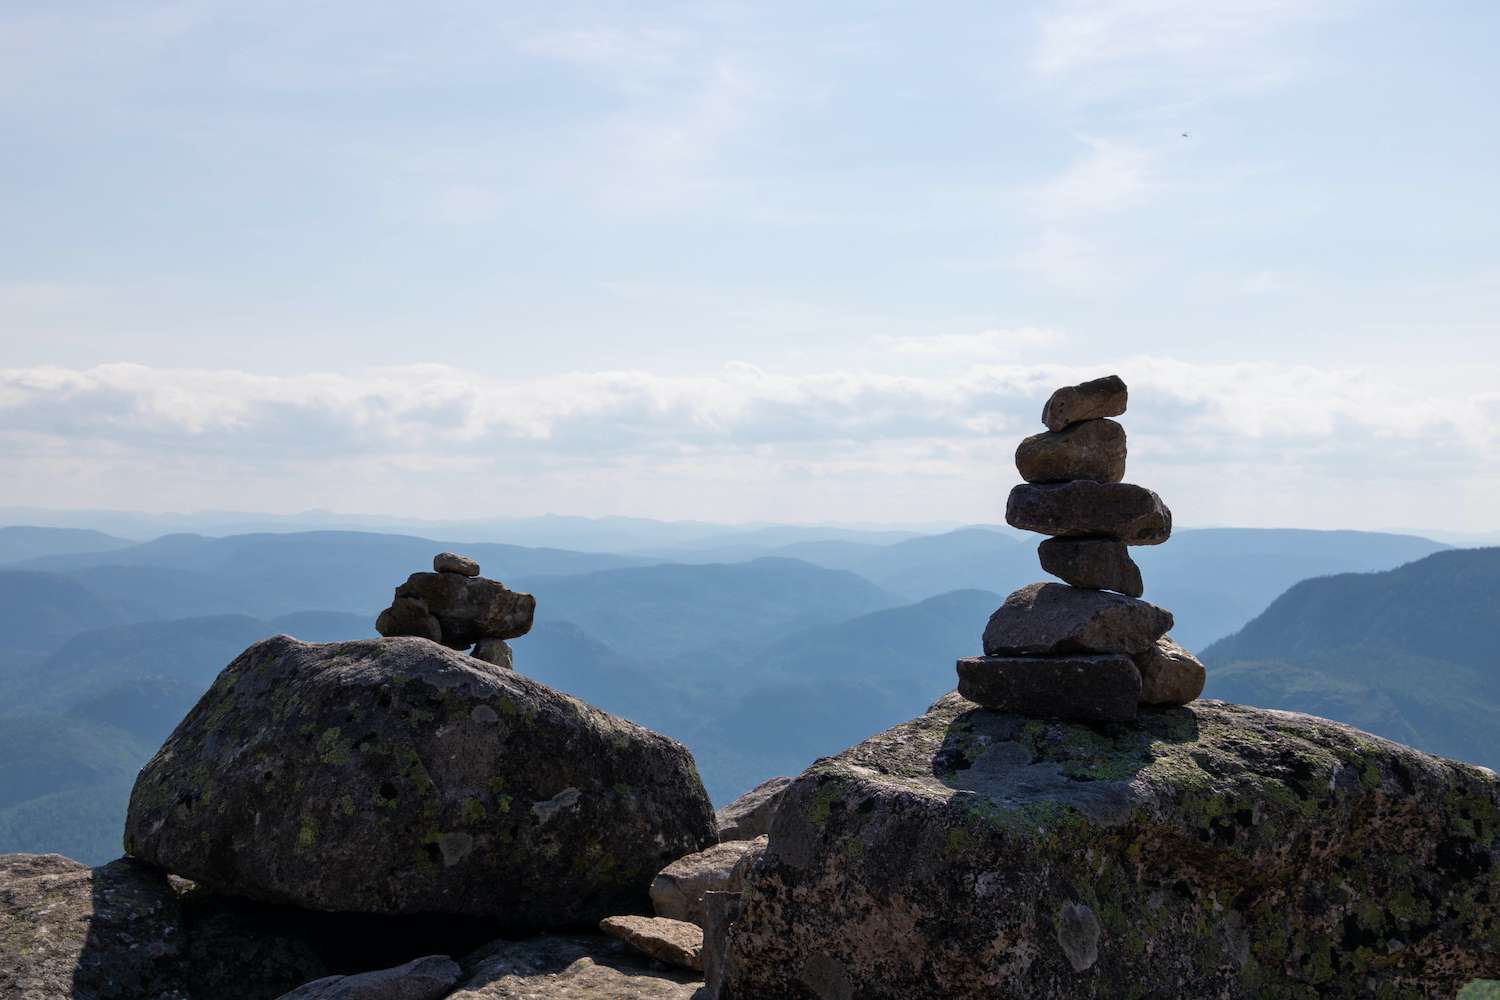 Two cairns (Inukshuk rocks) on top of a mountain in the Grands-Jardins National Park in the Charlevoix Region in Quebec, Canada.